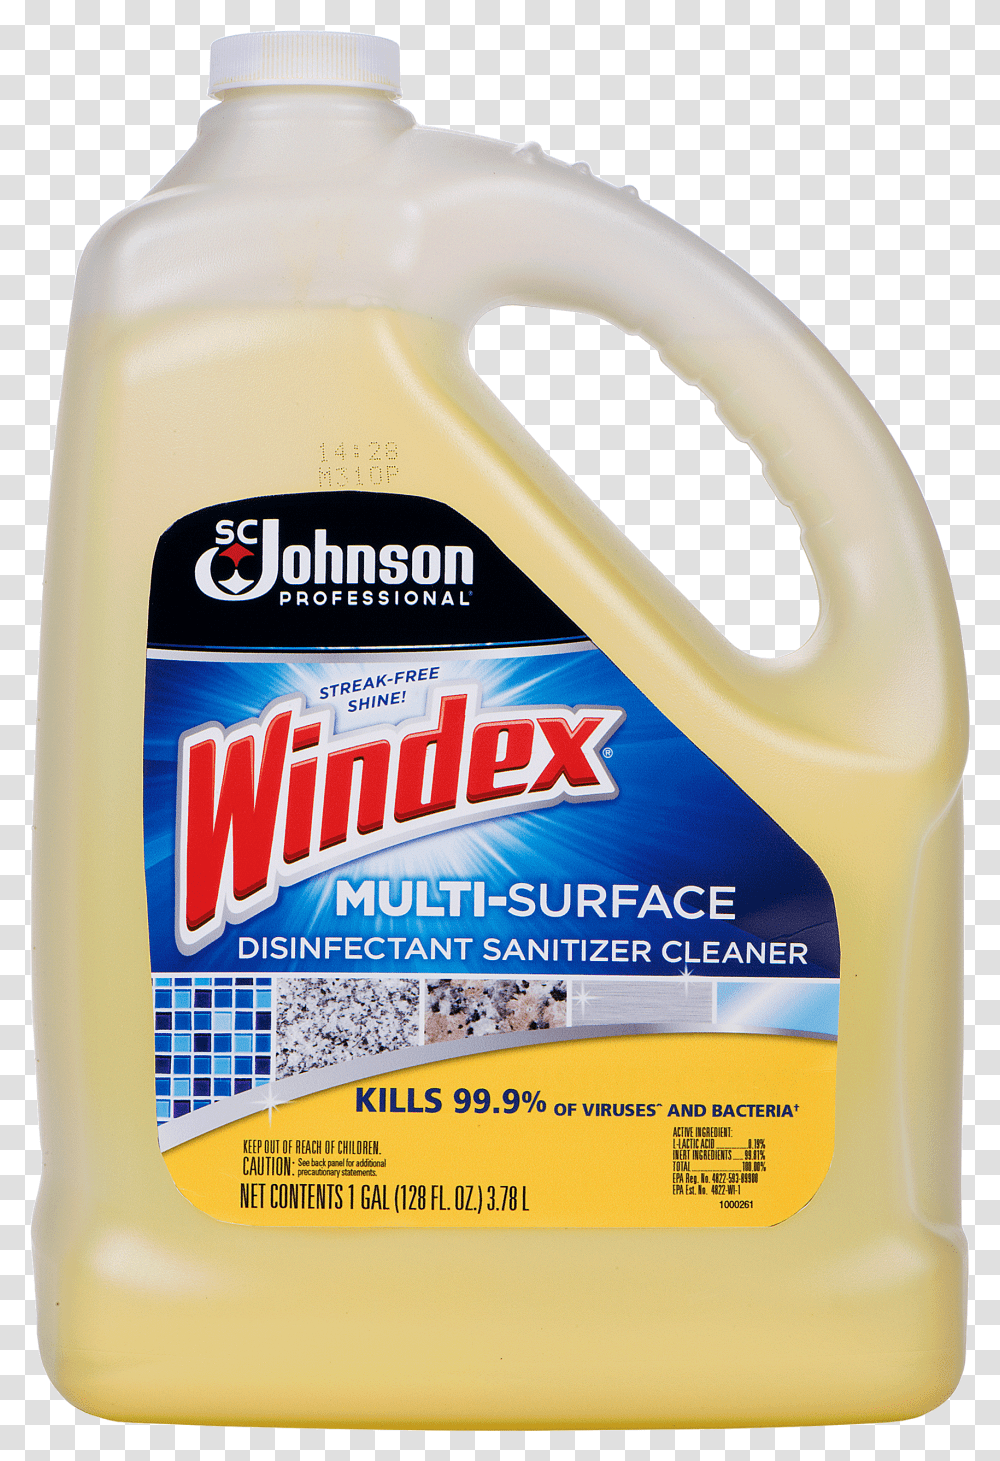 Windex Multi Surface Disinfectant Sanitizer Cleaner Bottle, Food, Mayonnaise, Mustard, Honey Transparent Png